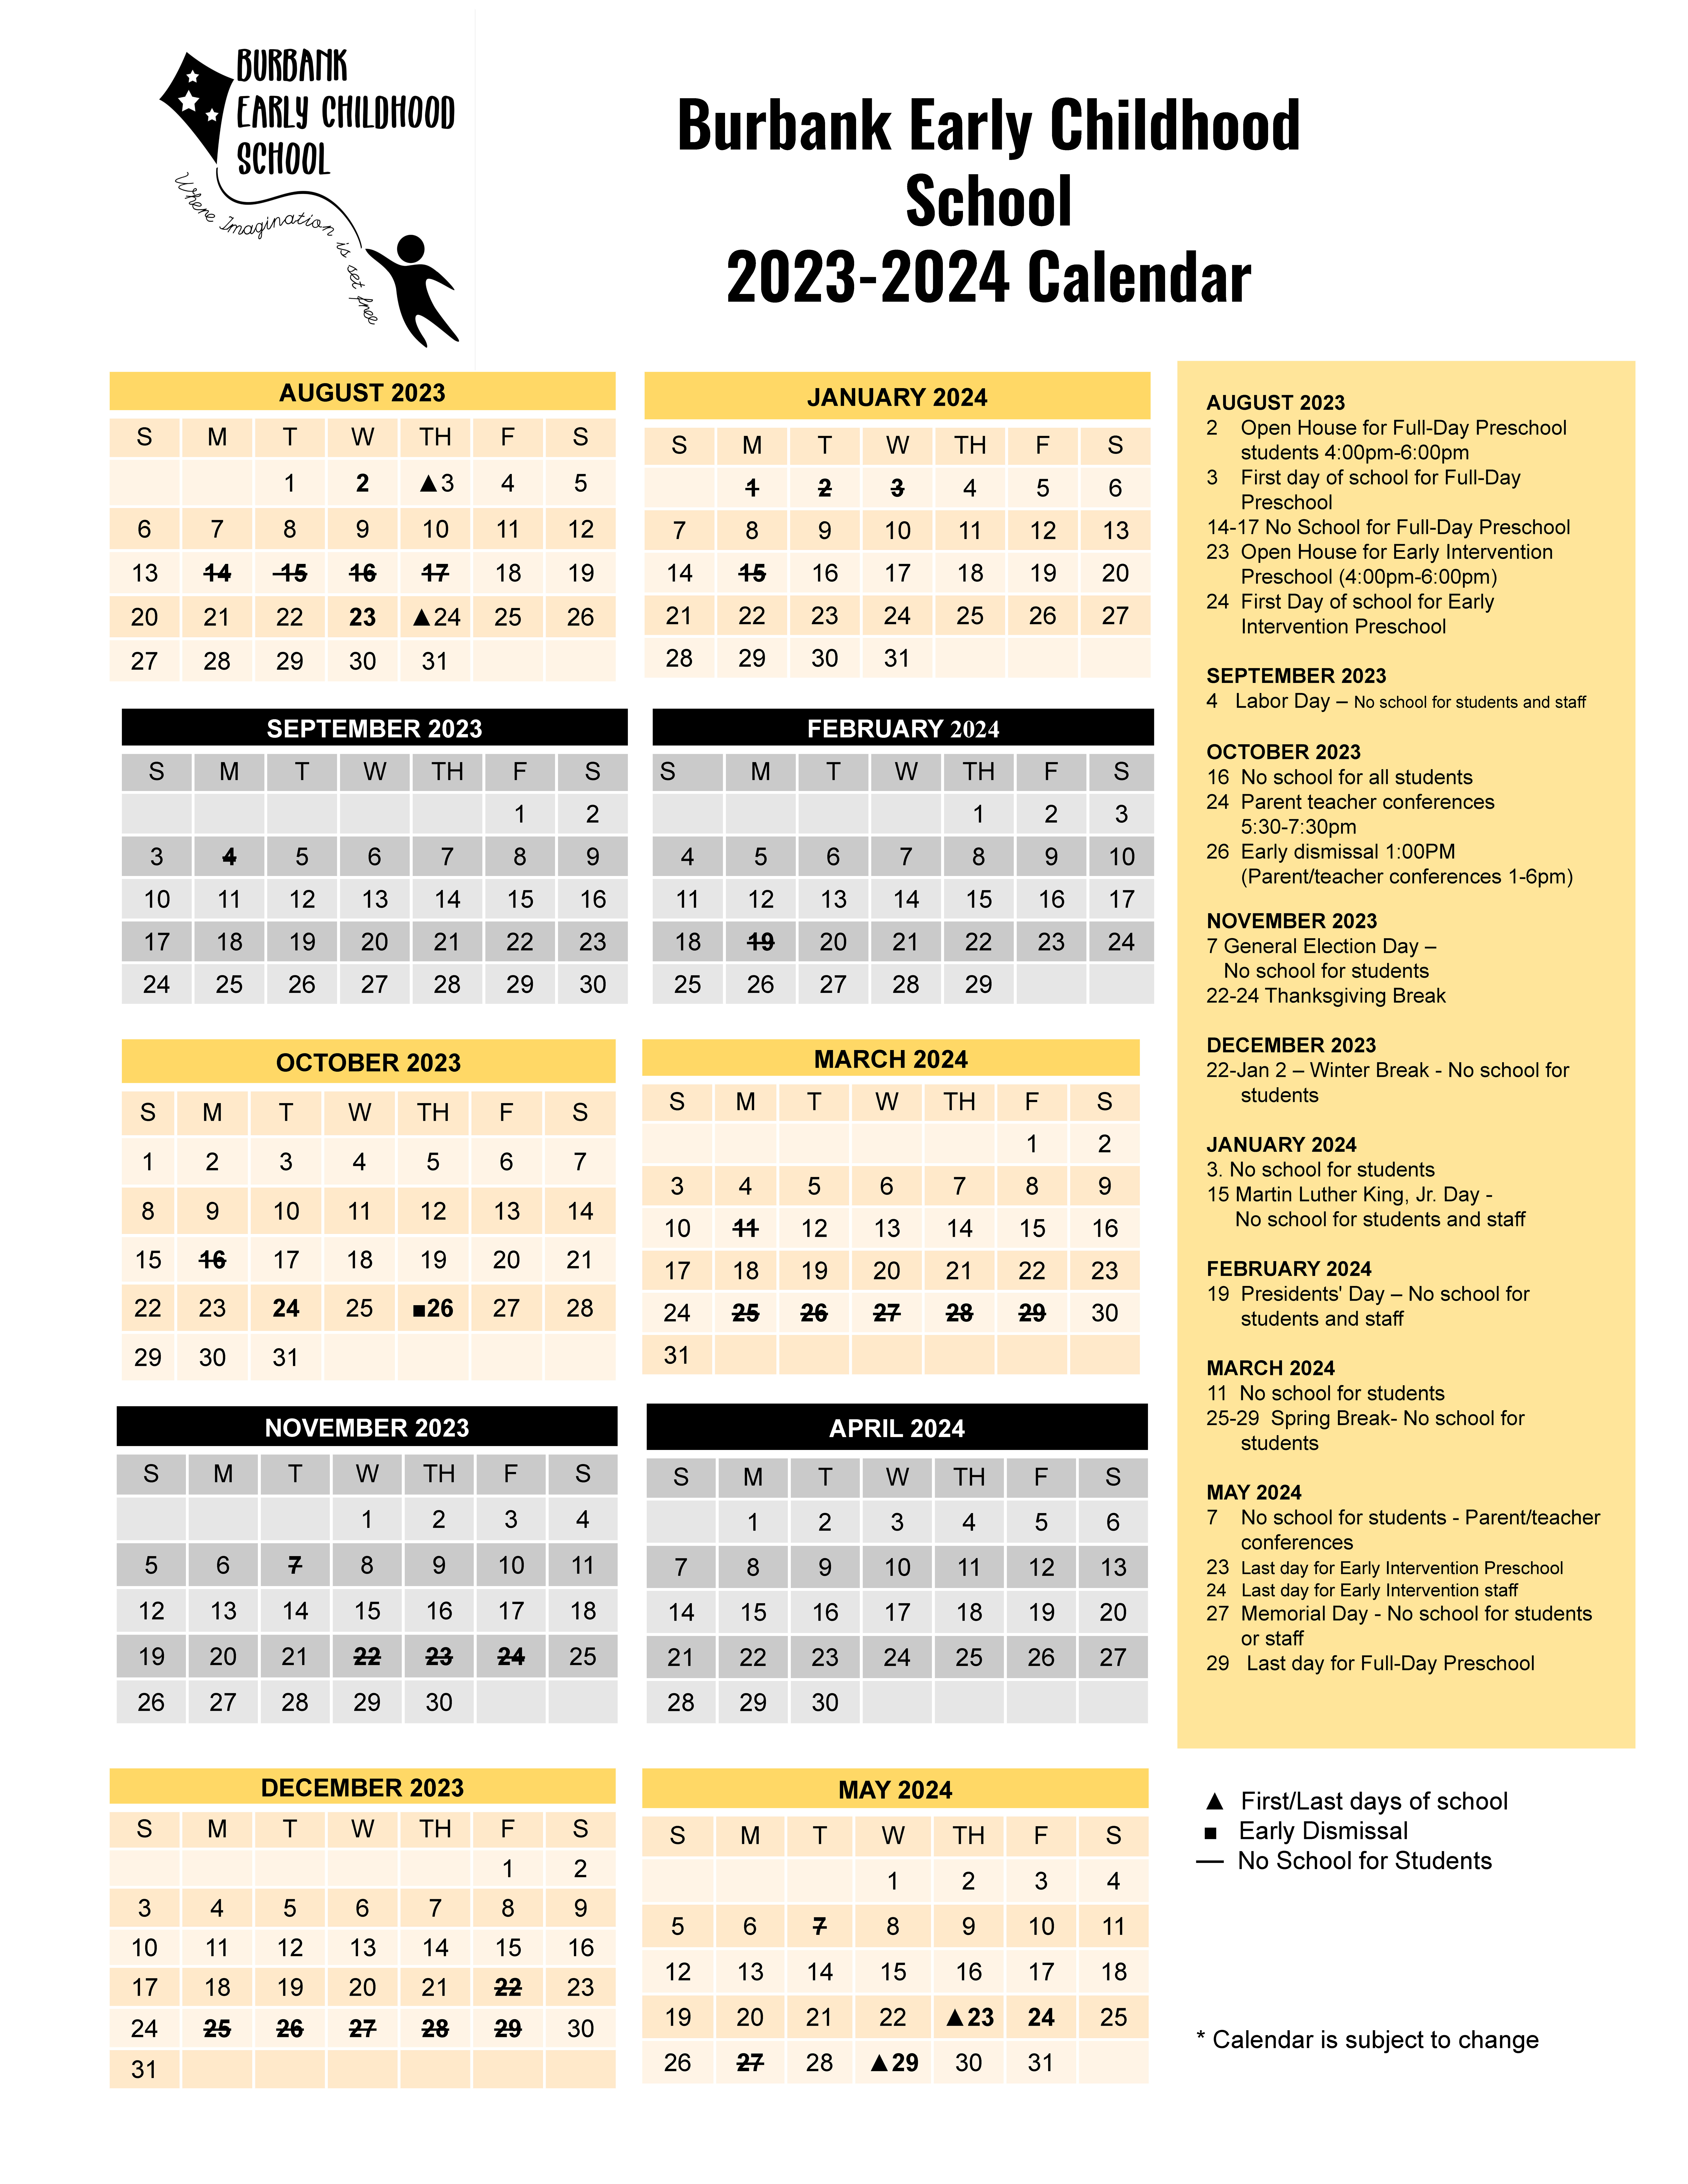 An image of the Burbank 2023-2024 school year calendar, which can be accessed via the PDF below